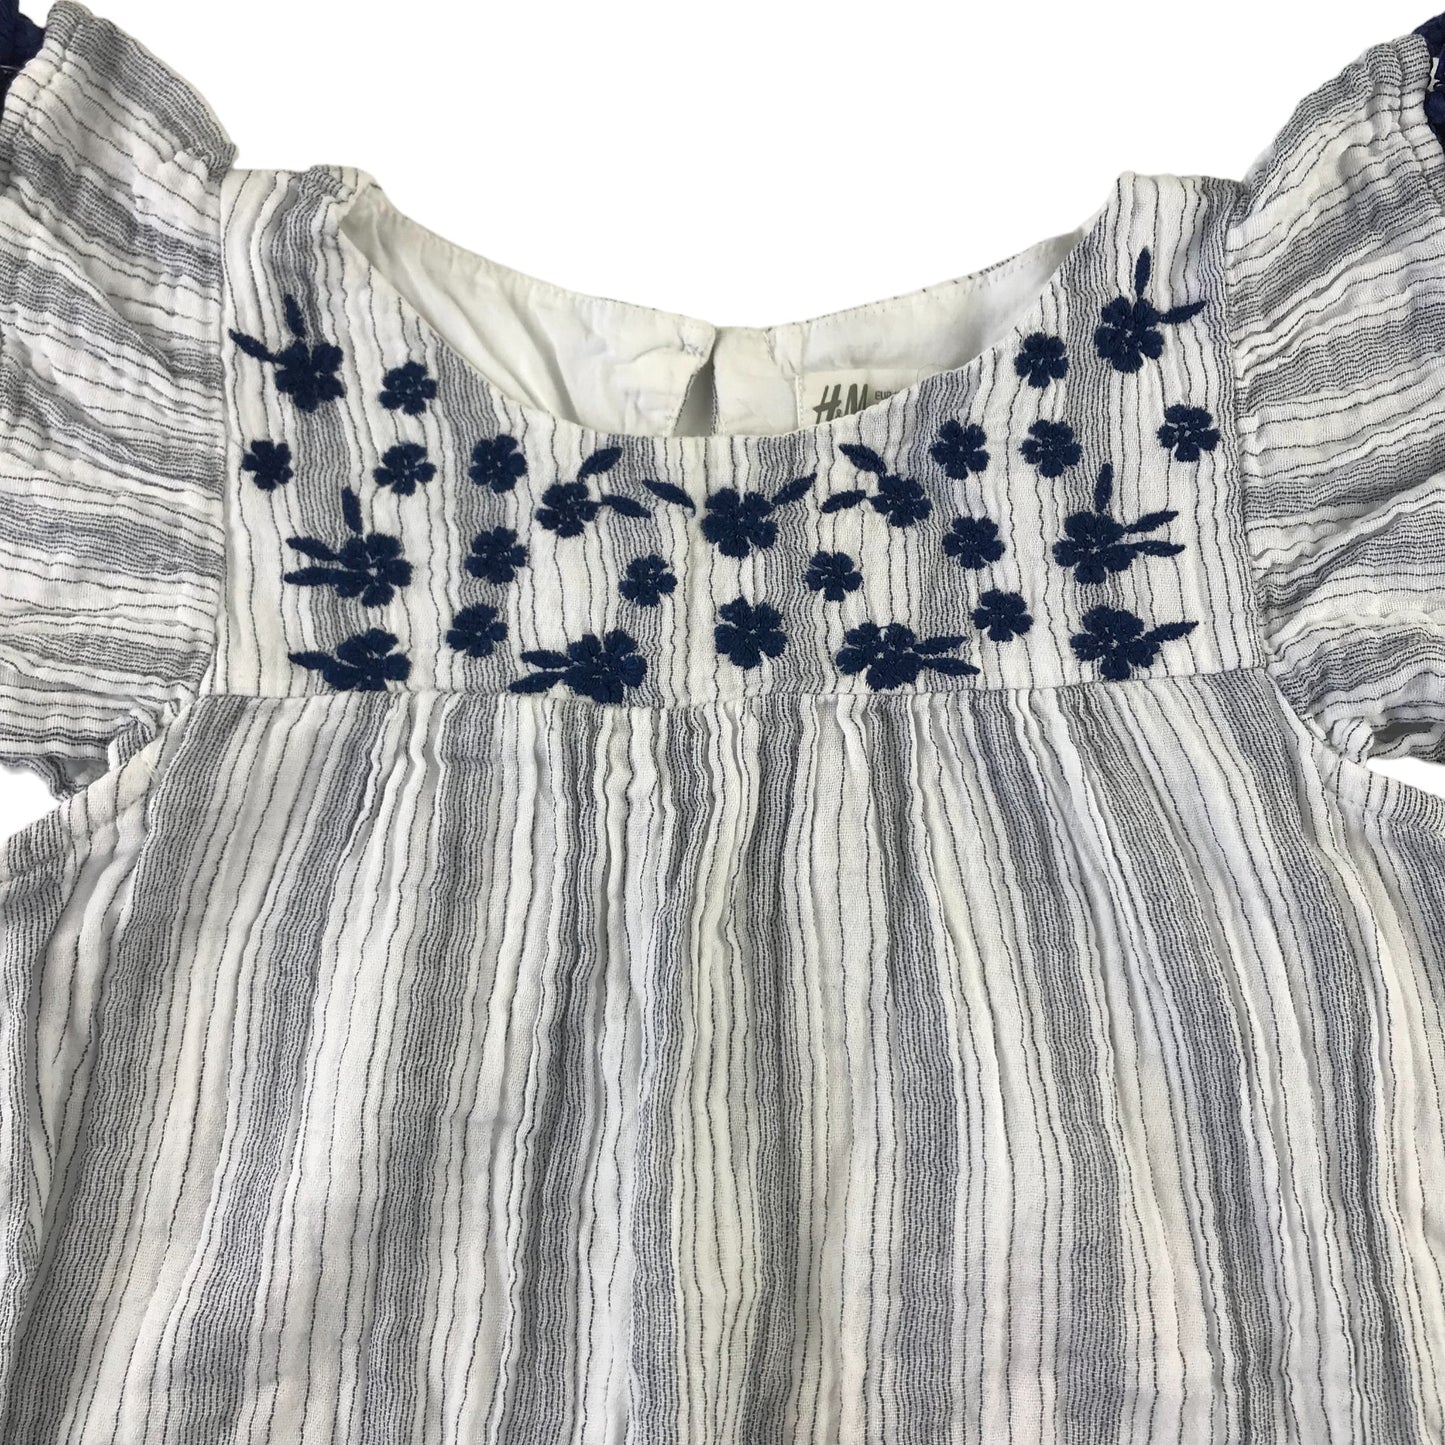 H&M dress 7-8 years white and navy floral embroidered empire cut butterfly sleeve cotton